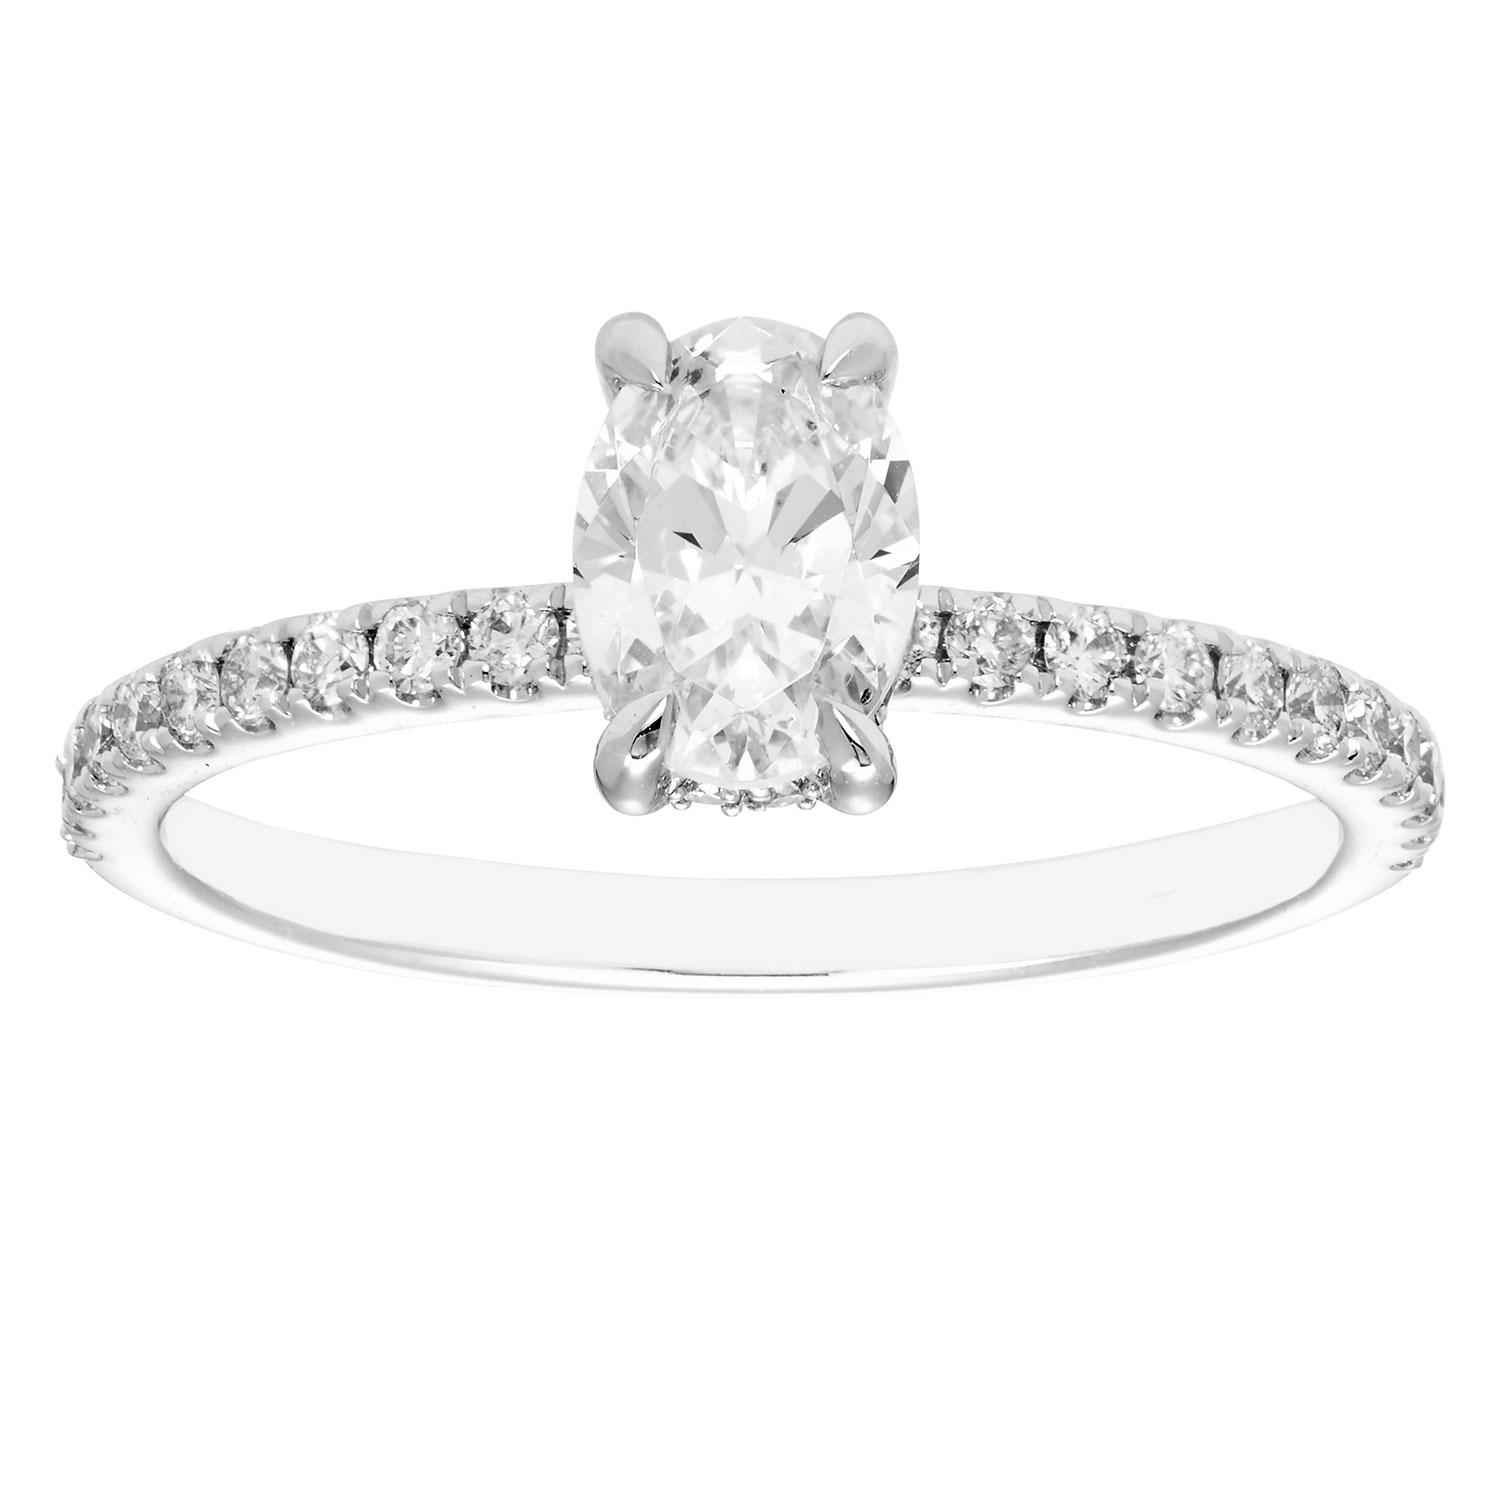 1.06 CT. T.W. Oval Diamond Engagement Ring in 14K White Gold, 9